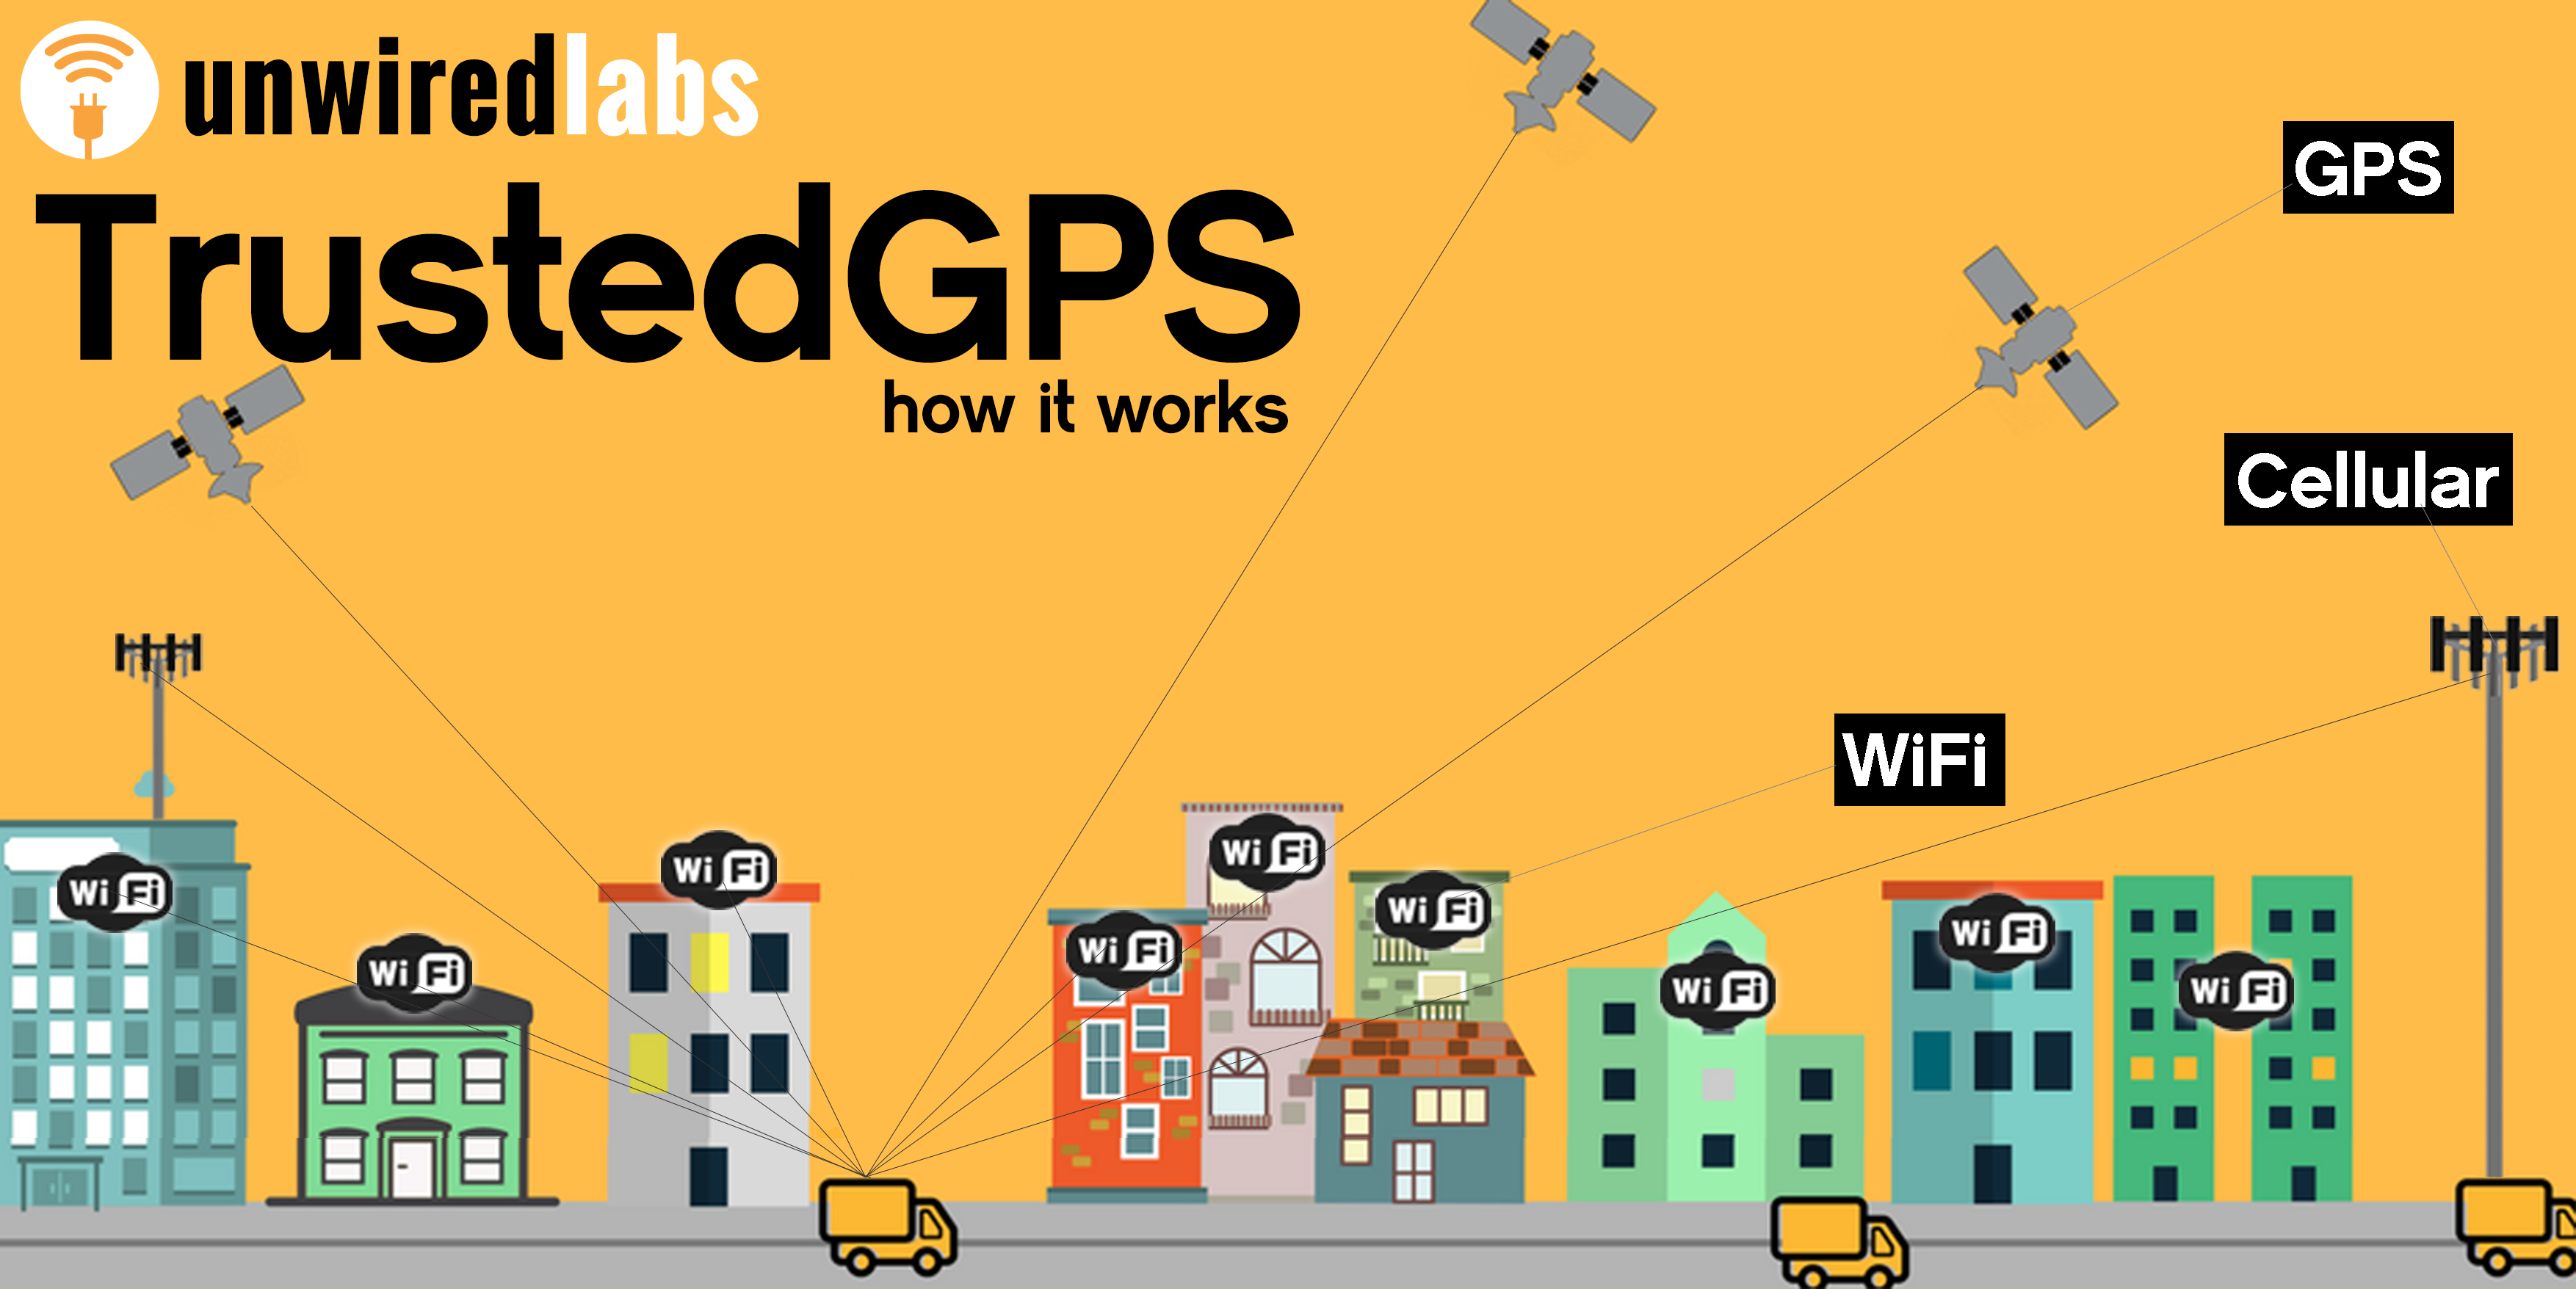 Unwired Labs' Trusted GPS